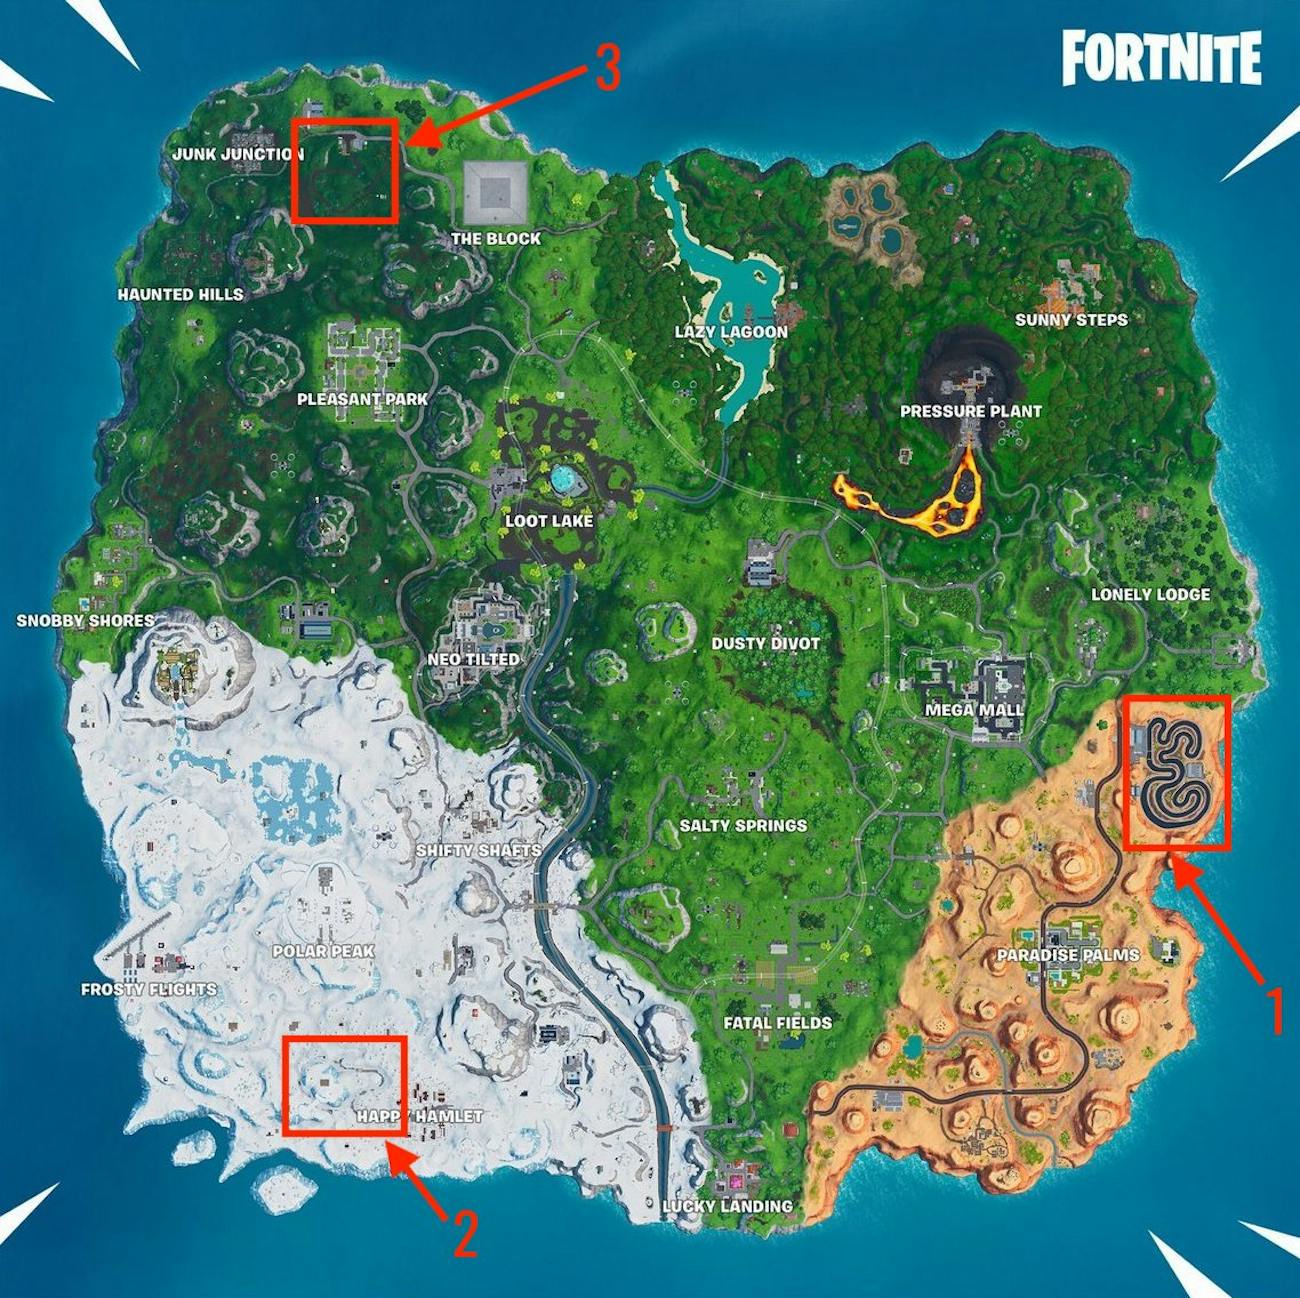 Fortnite Desert Snowy And Grasslands Race Track Locations - 